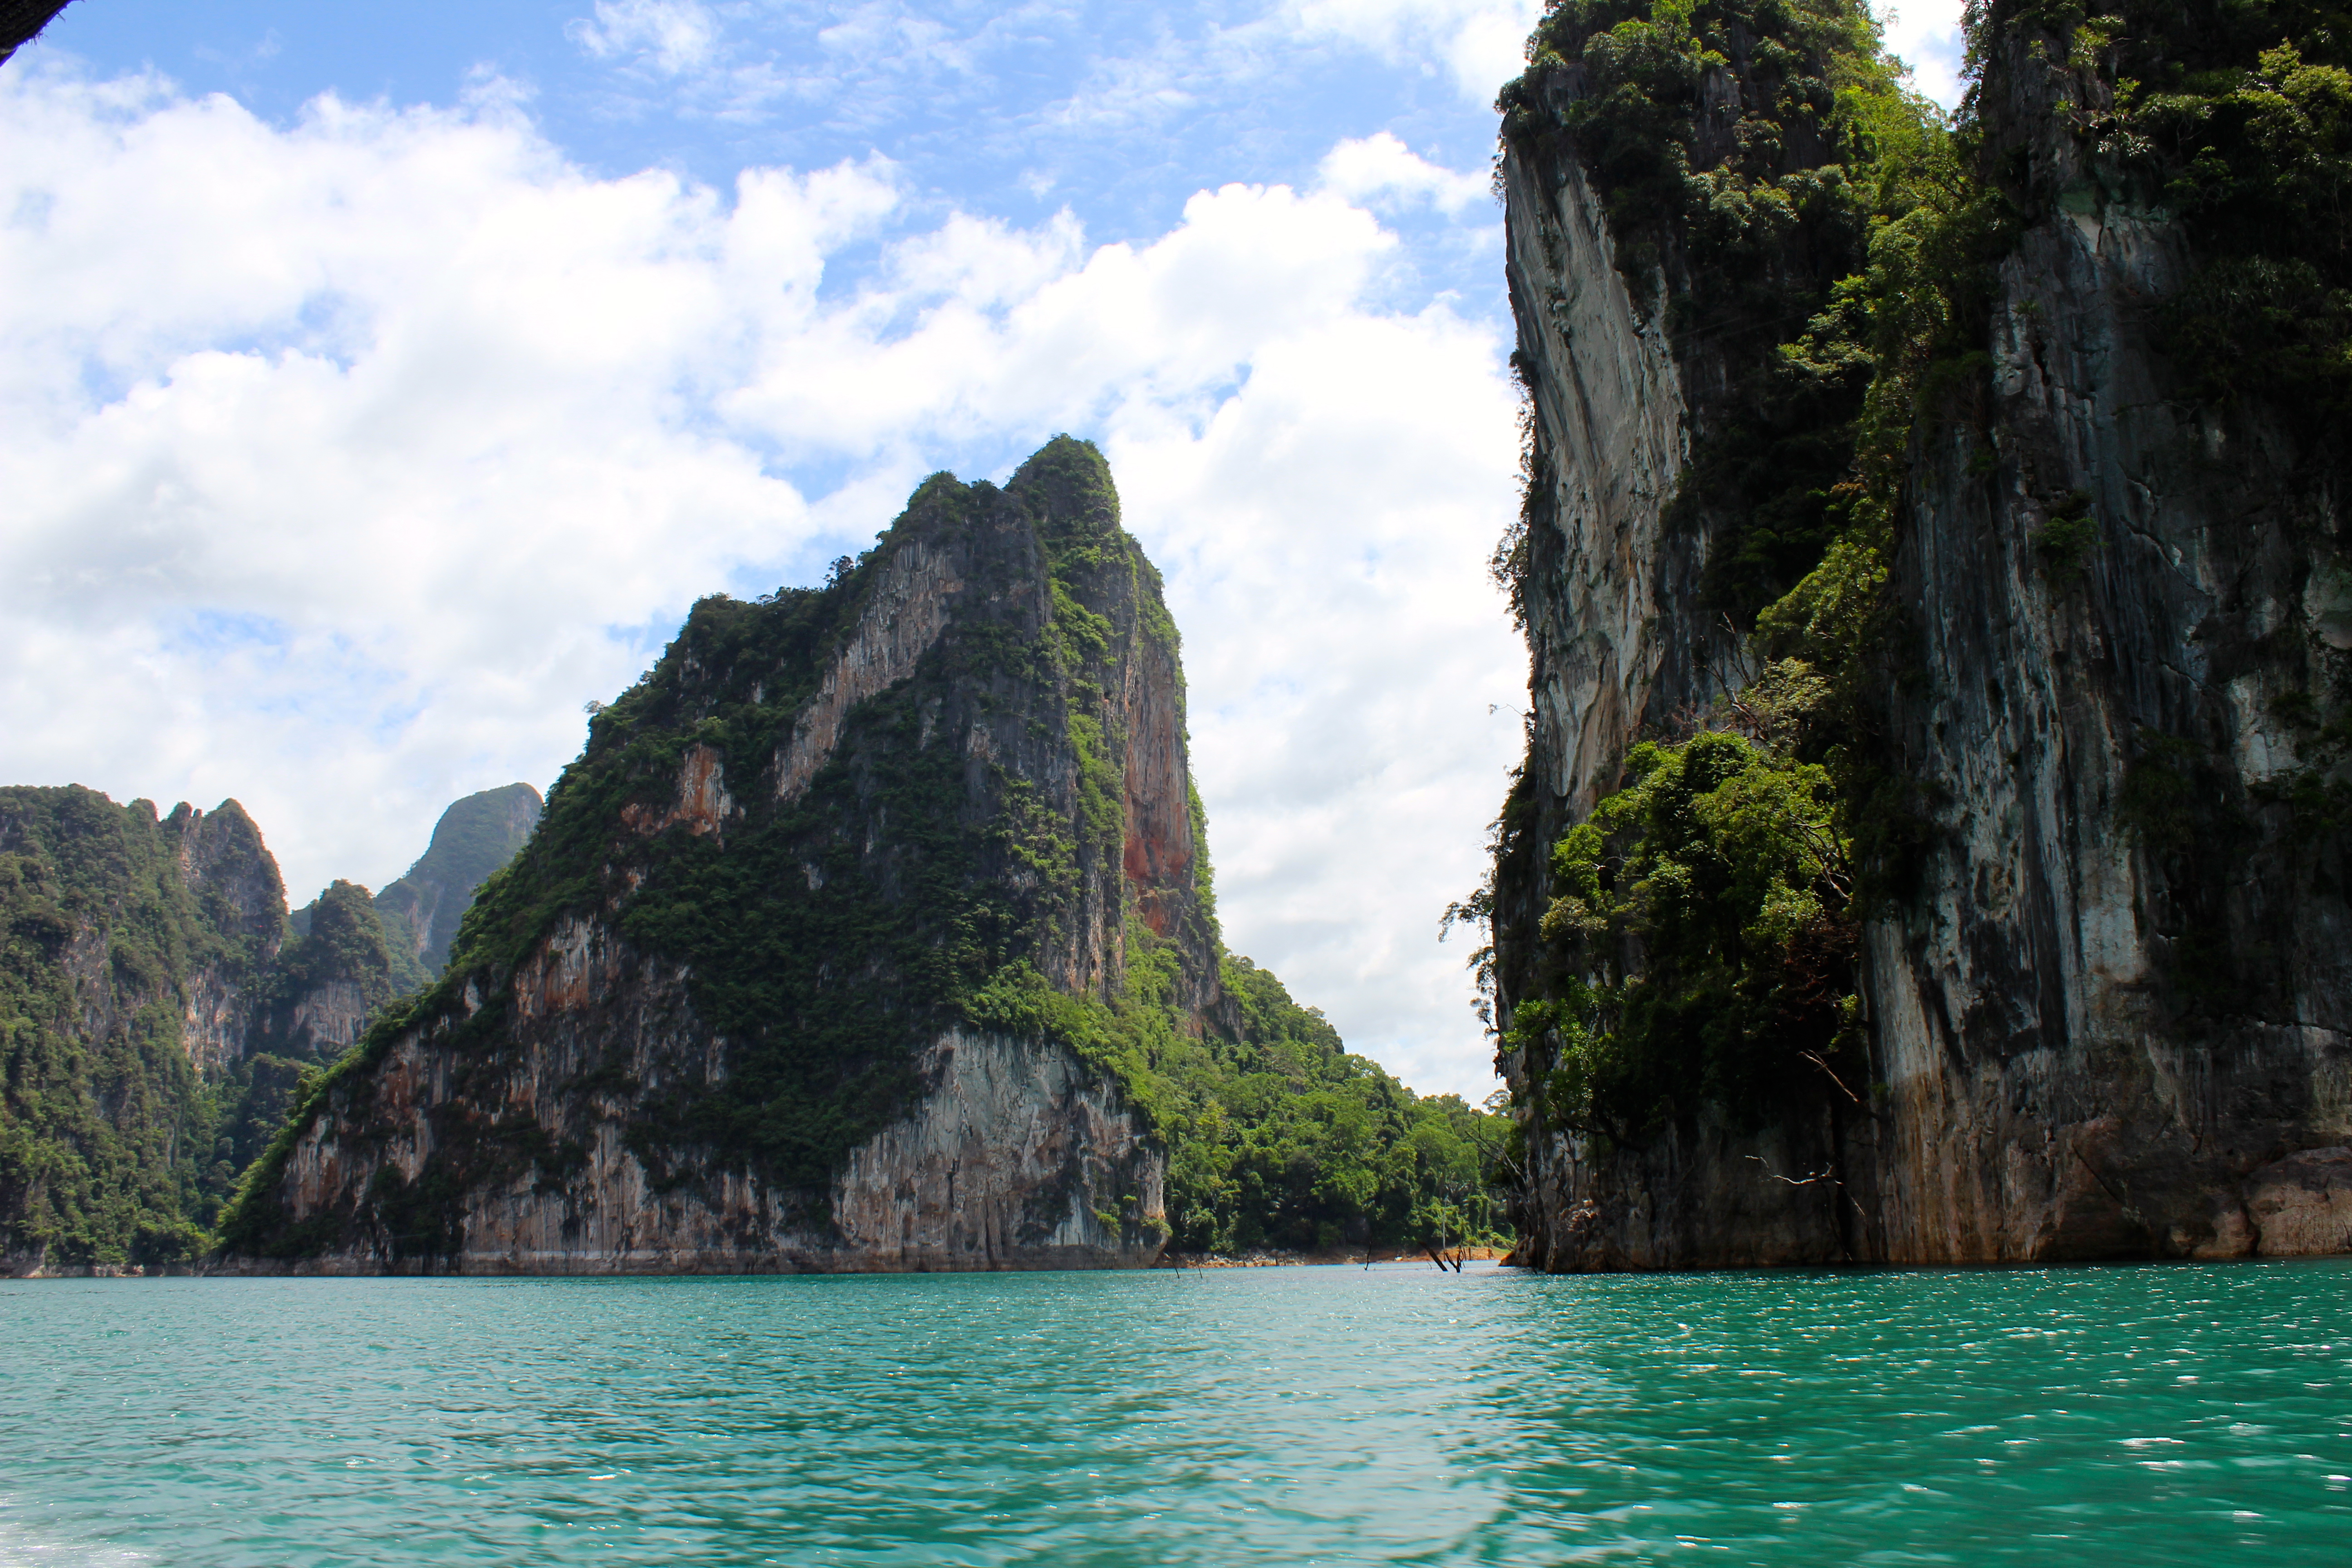 Cruising through Cheow Lan Lake, surrounded by limestone karst formations.